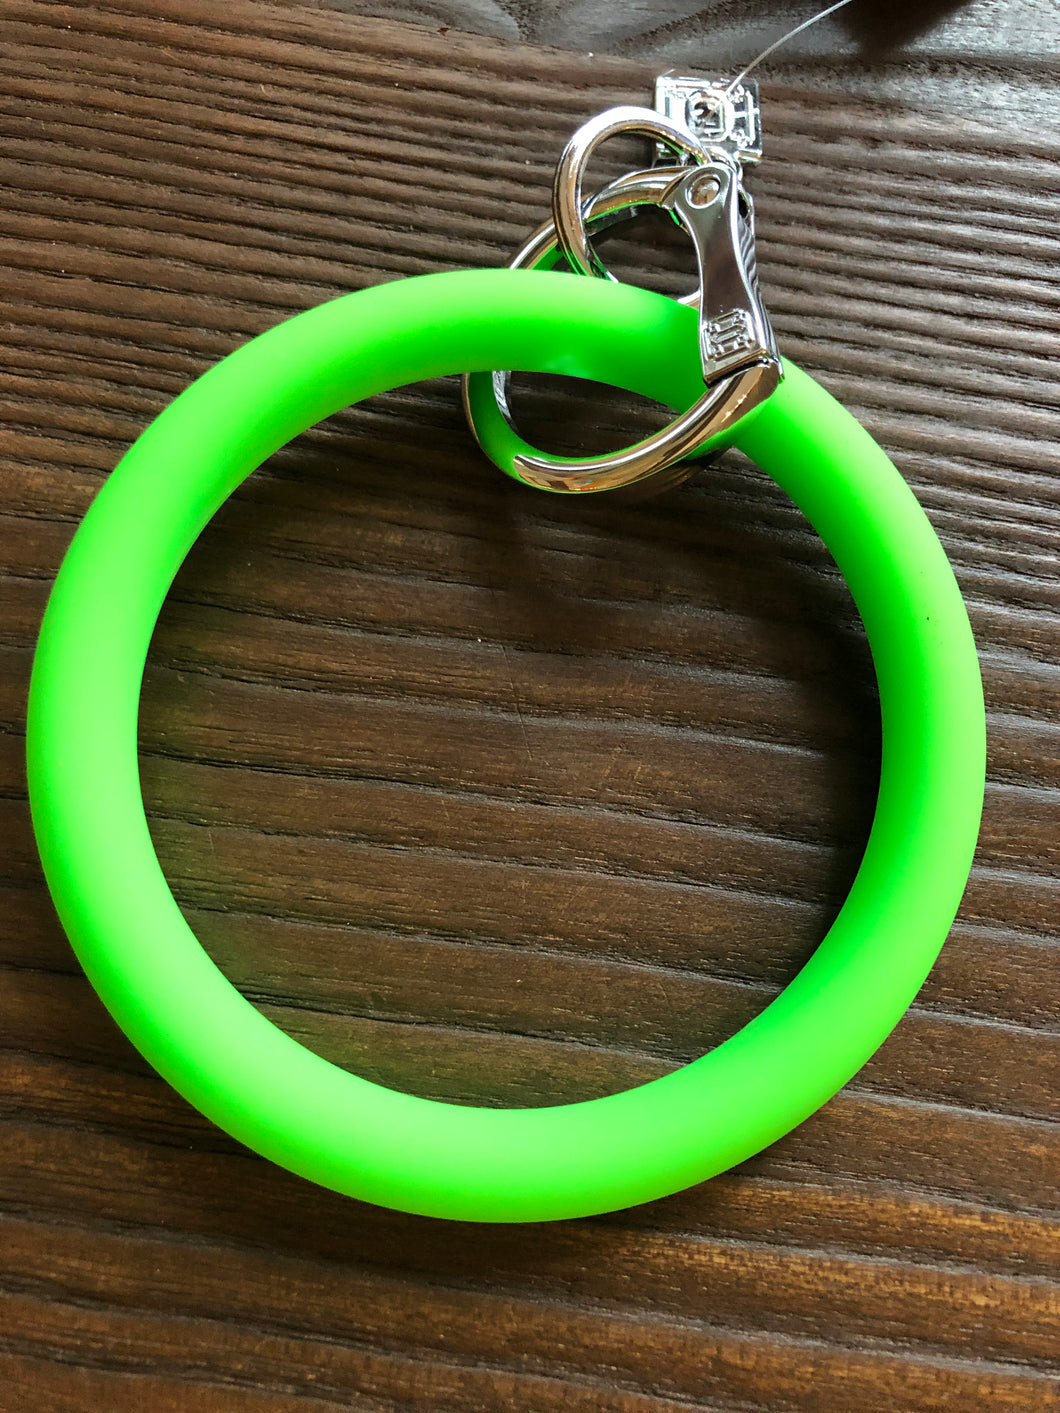 Big O Silicone Key ring- In the Grass